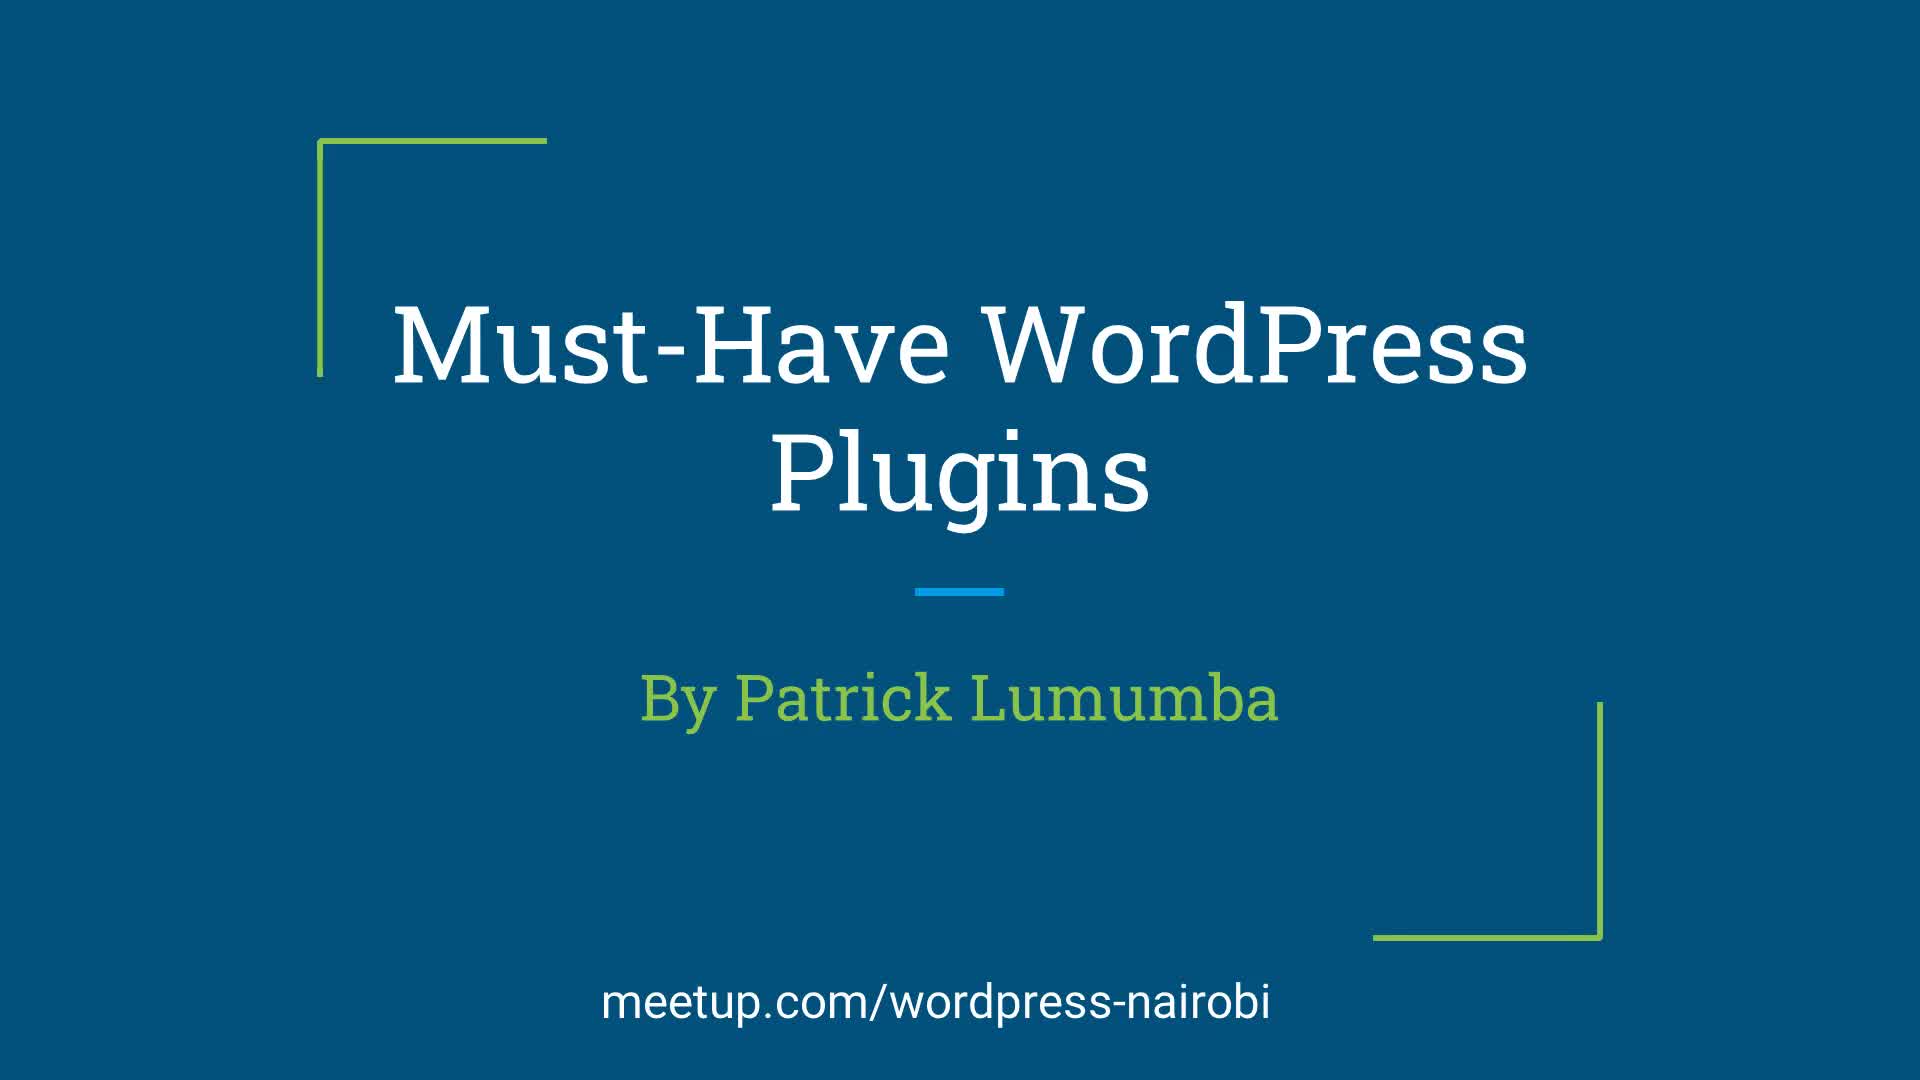 Must-Have WordPress Plugins for Every Website